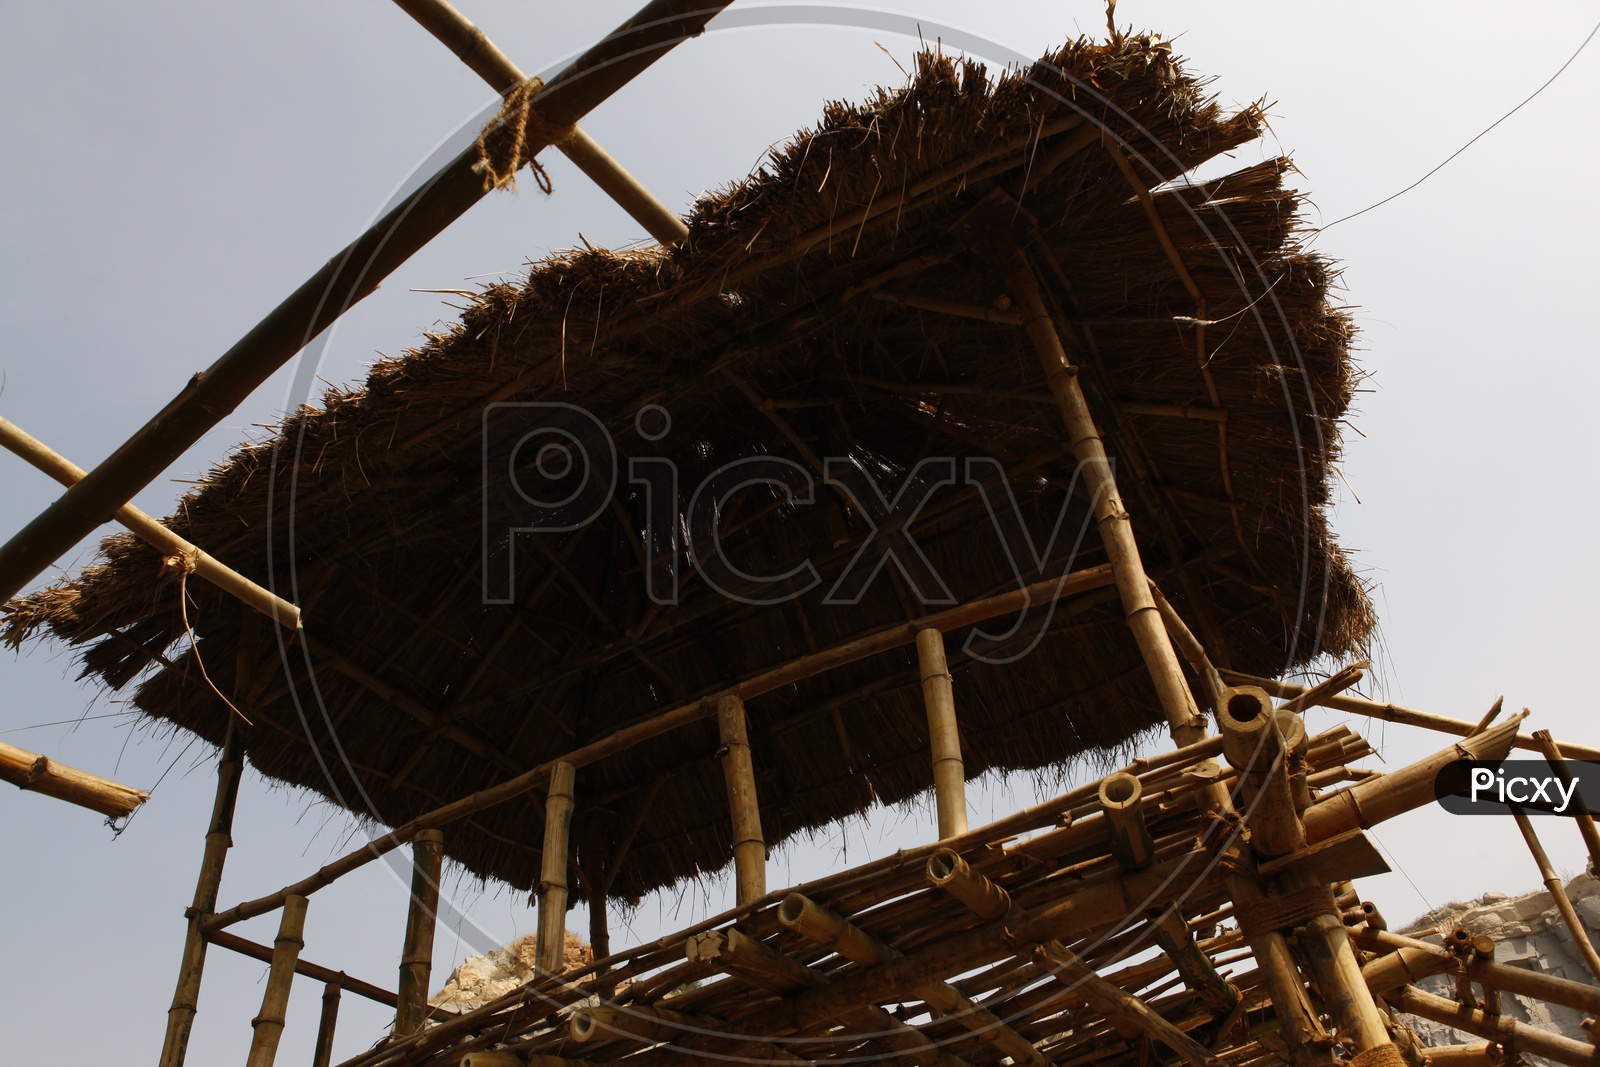 Thatched roof over a wooden poles structure